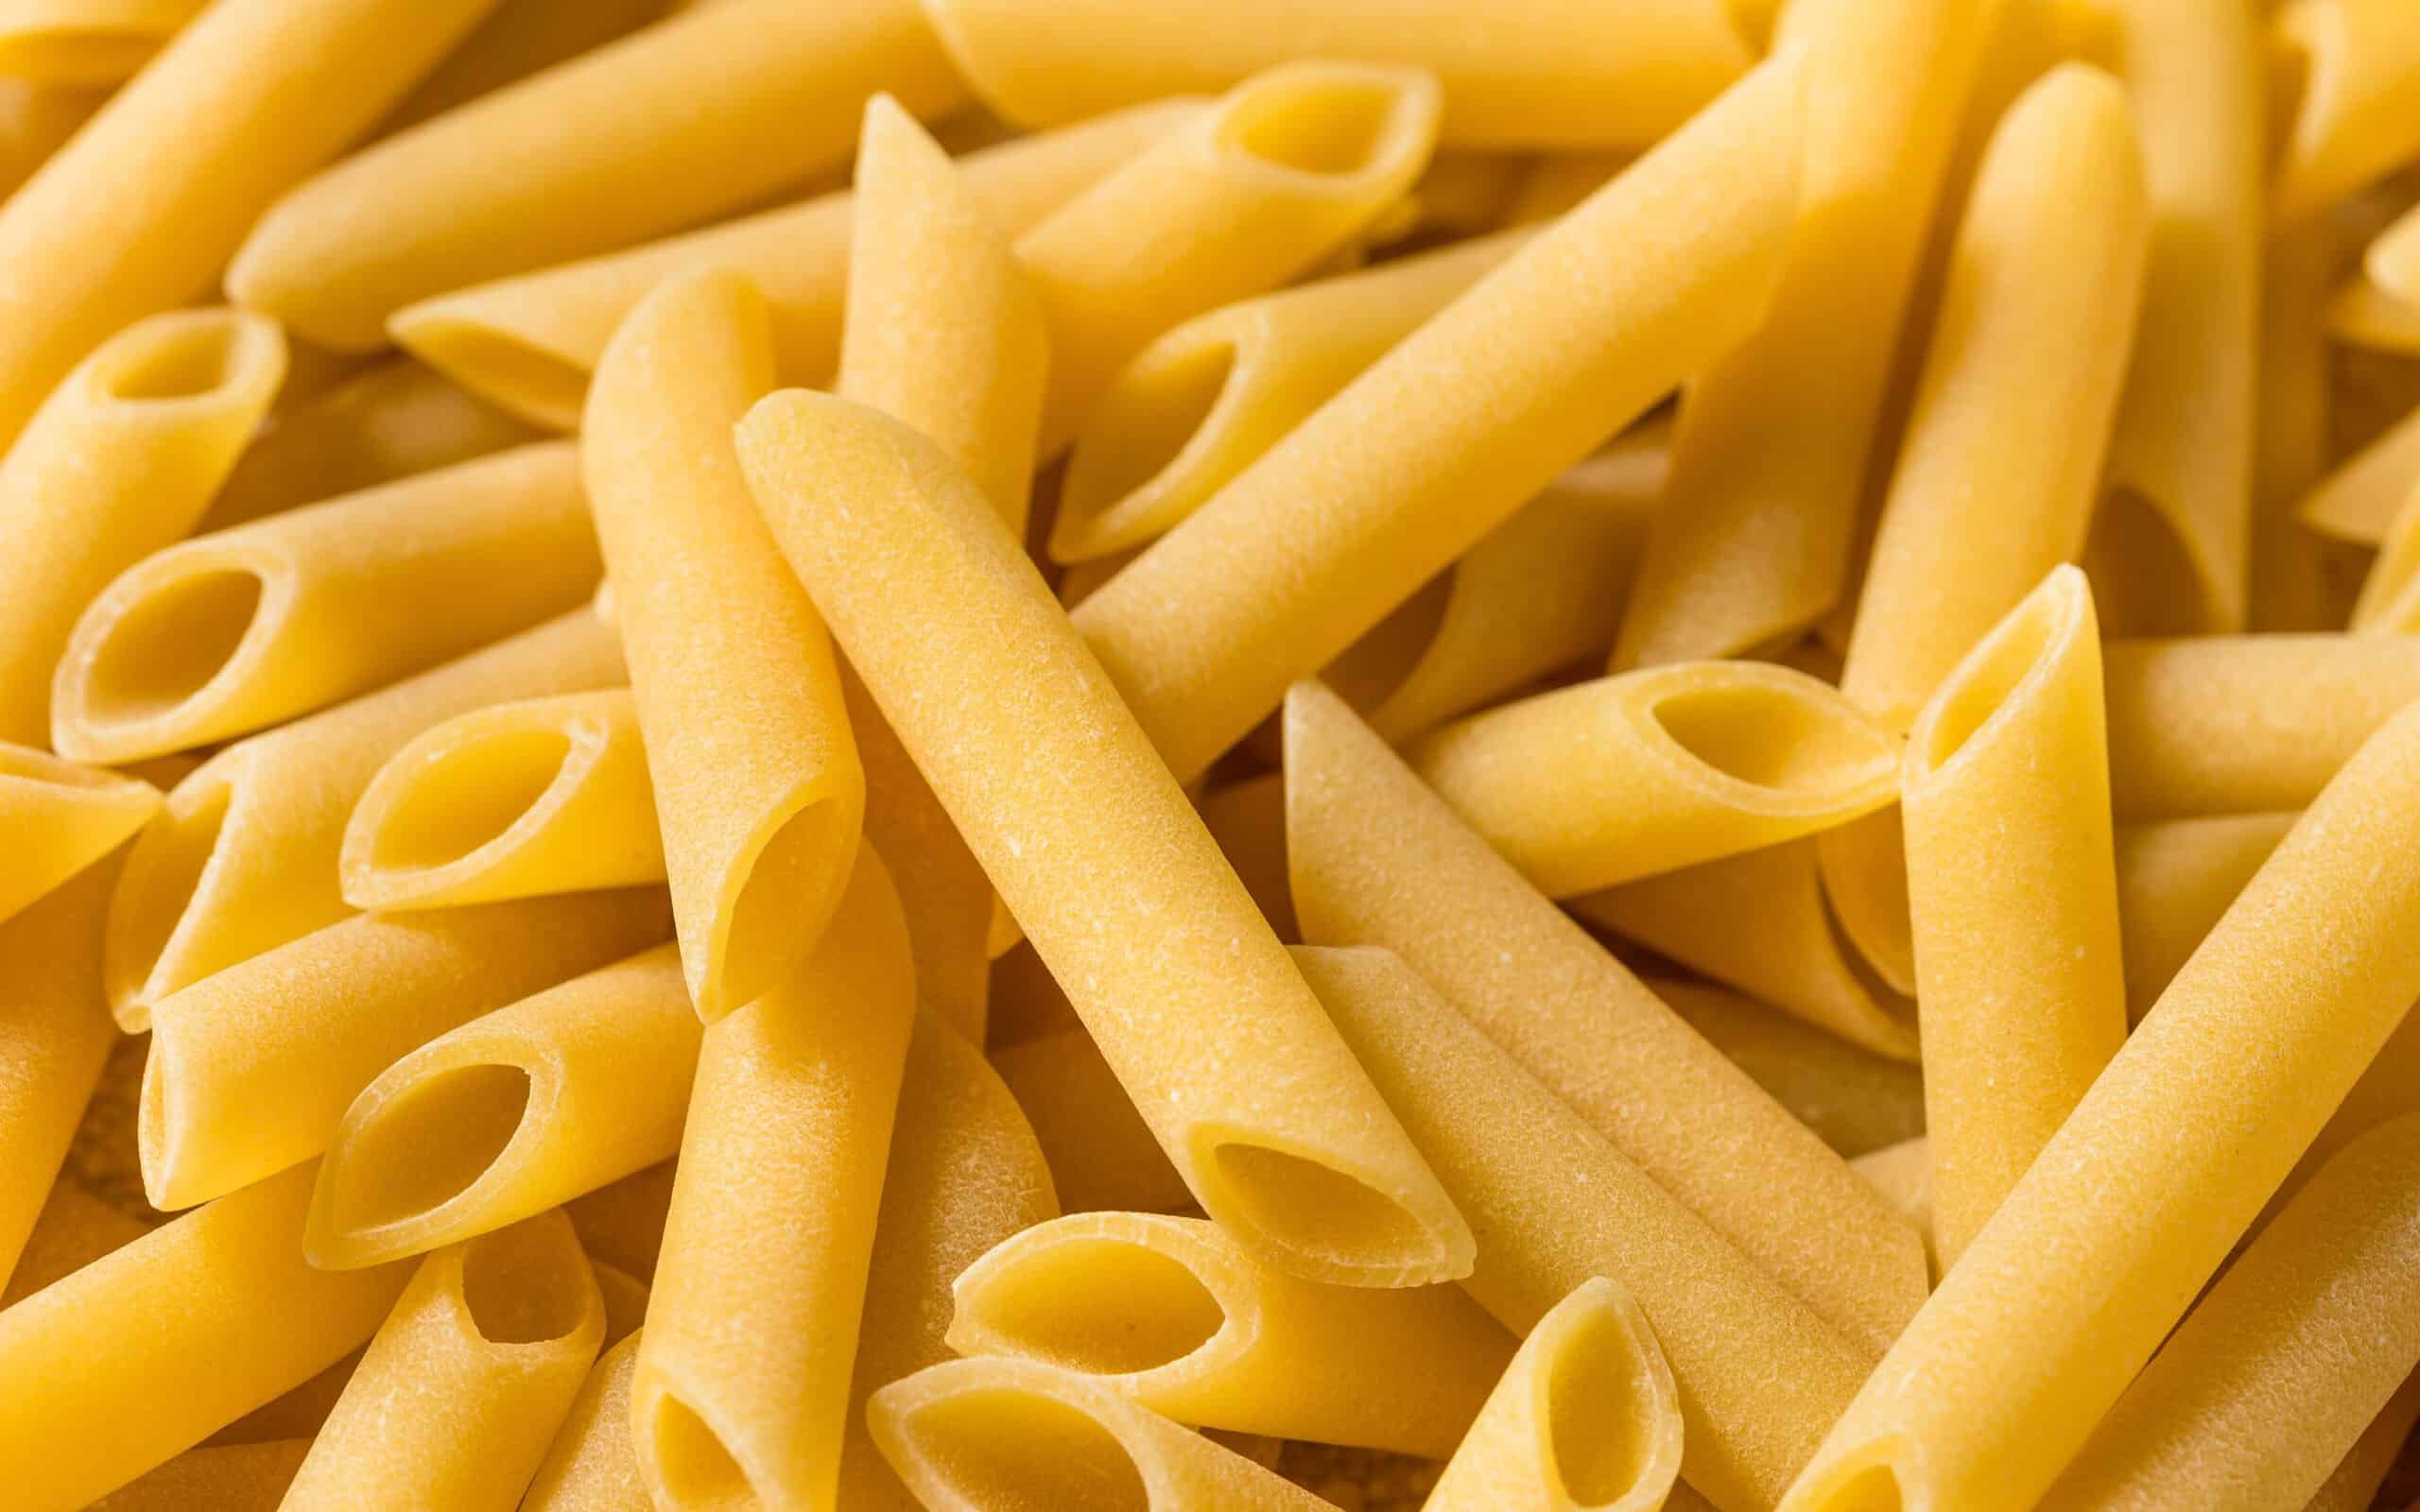 Half and Half vs Heavy Cream in Pasta: What's the Difference and